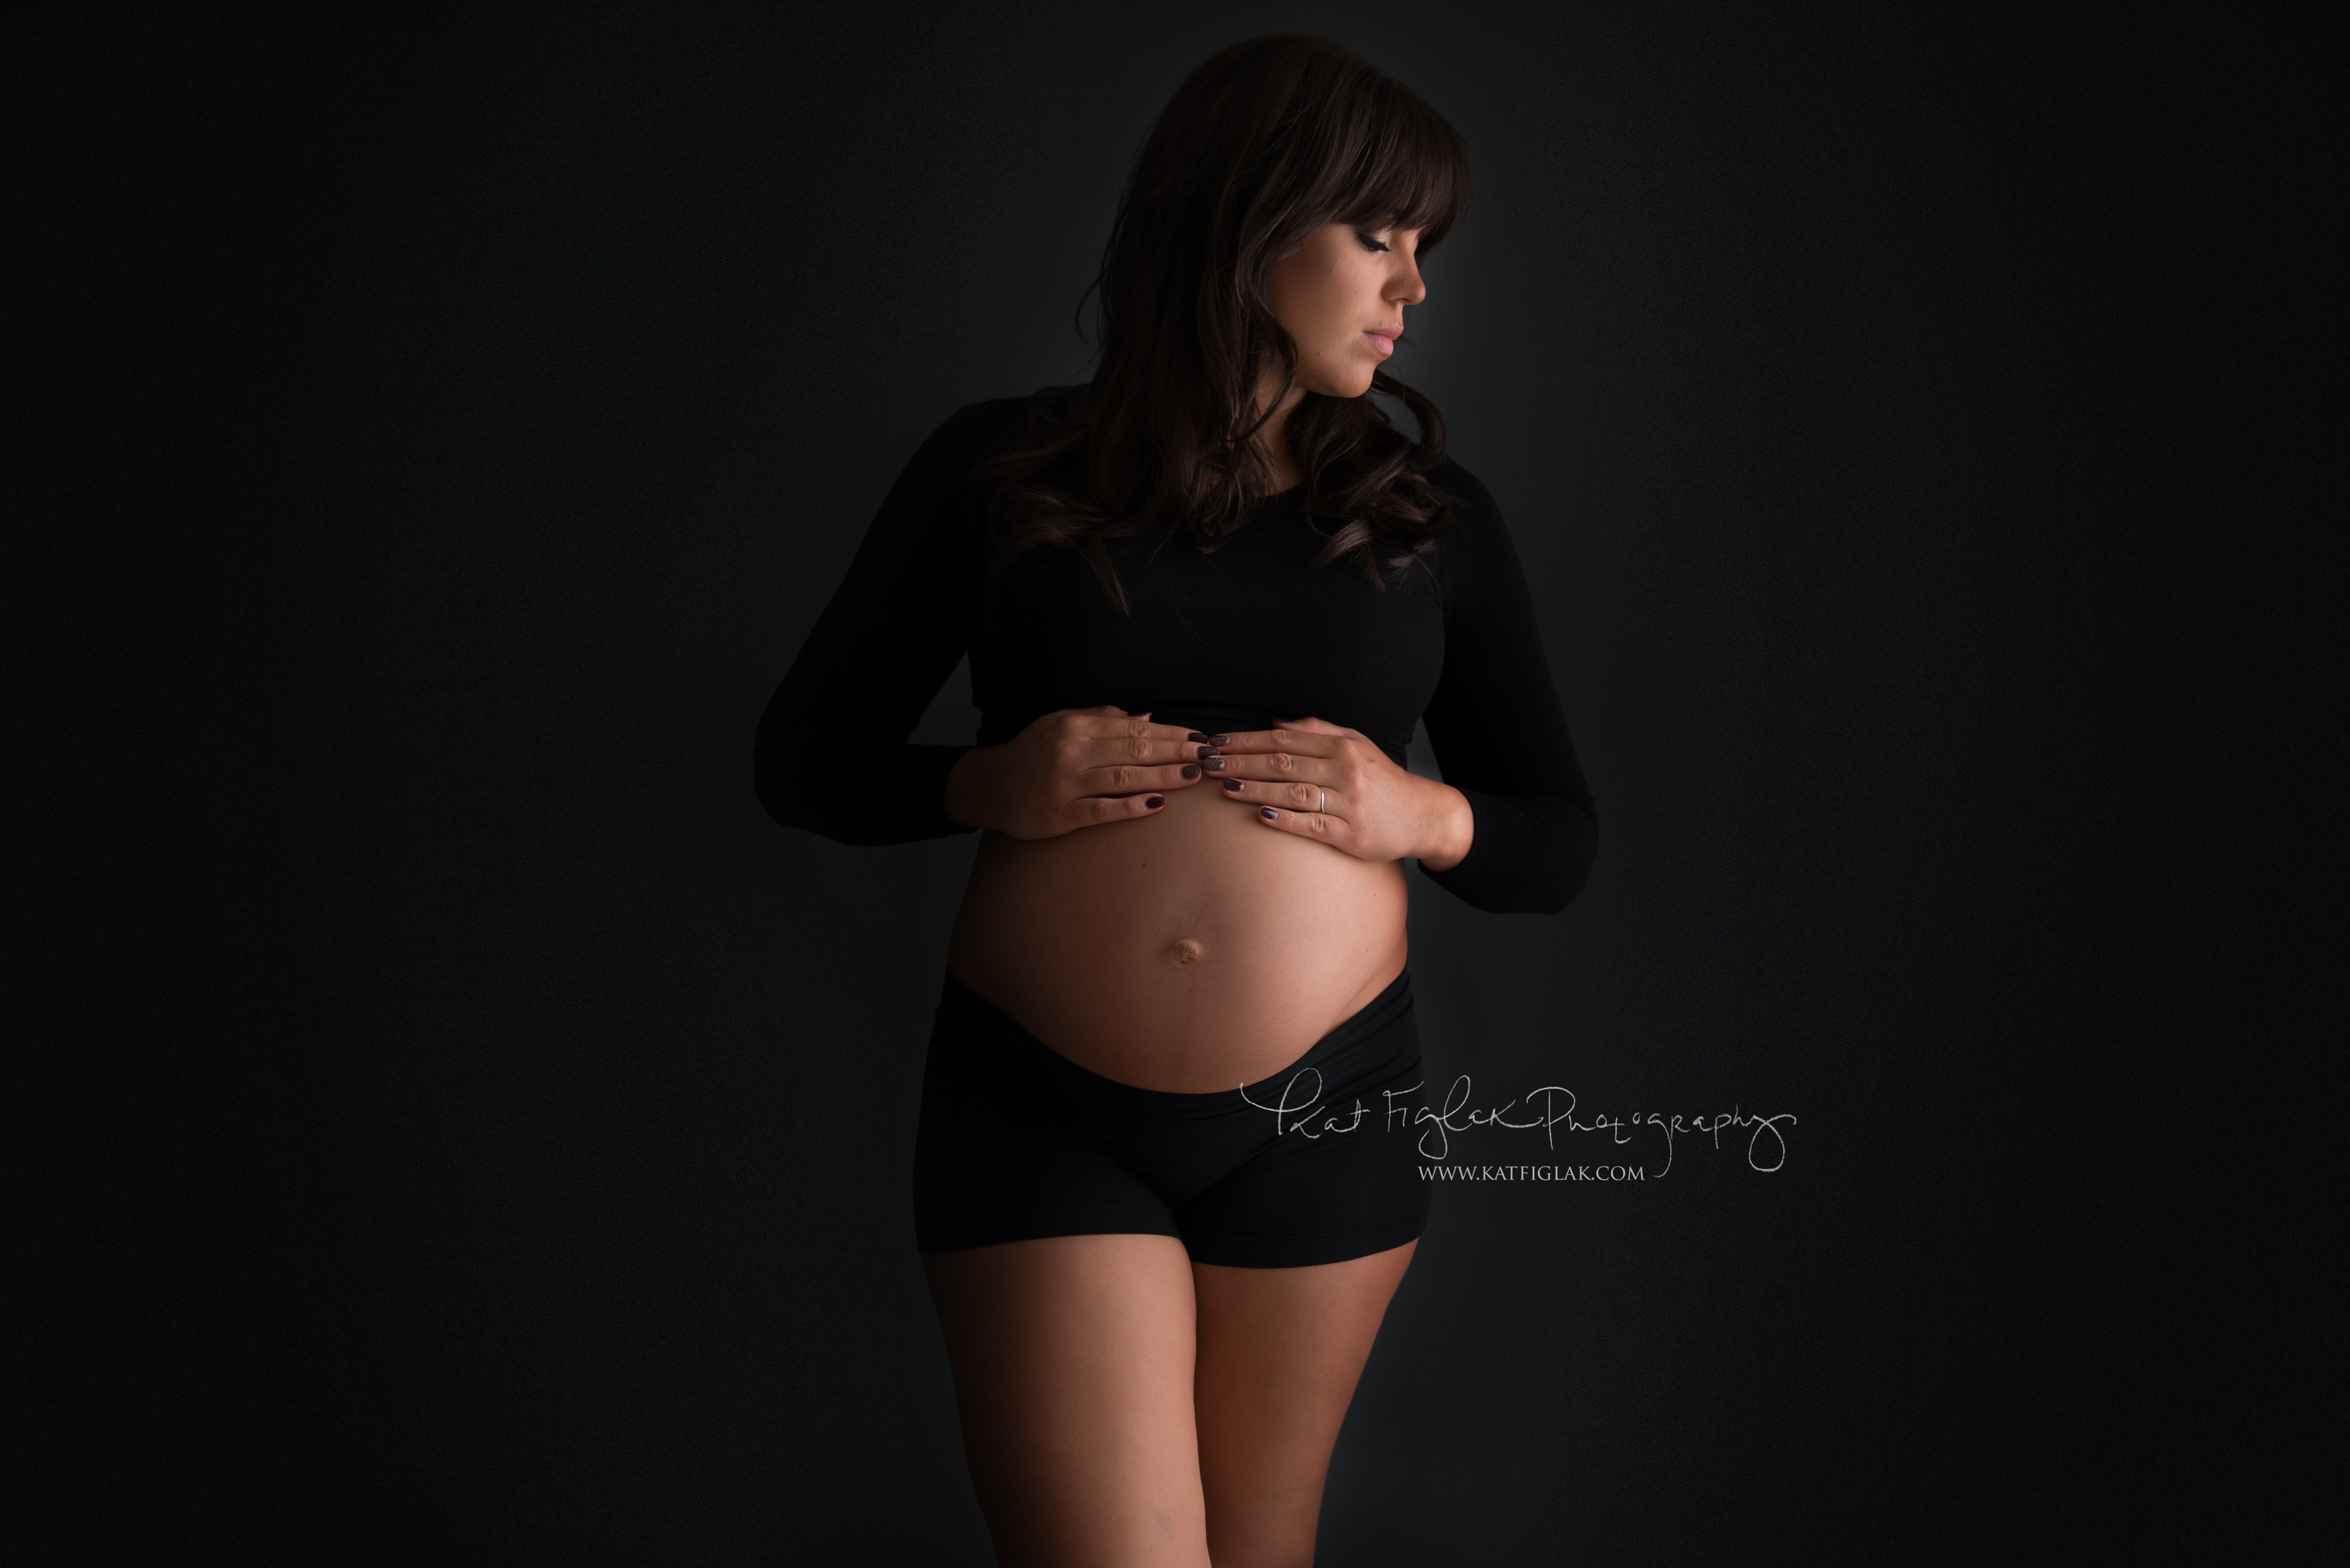 Pregnant woman wearing a black crop top and boyshorts holding her belly